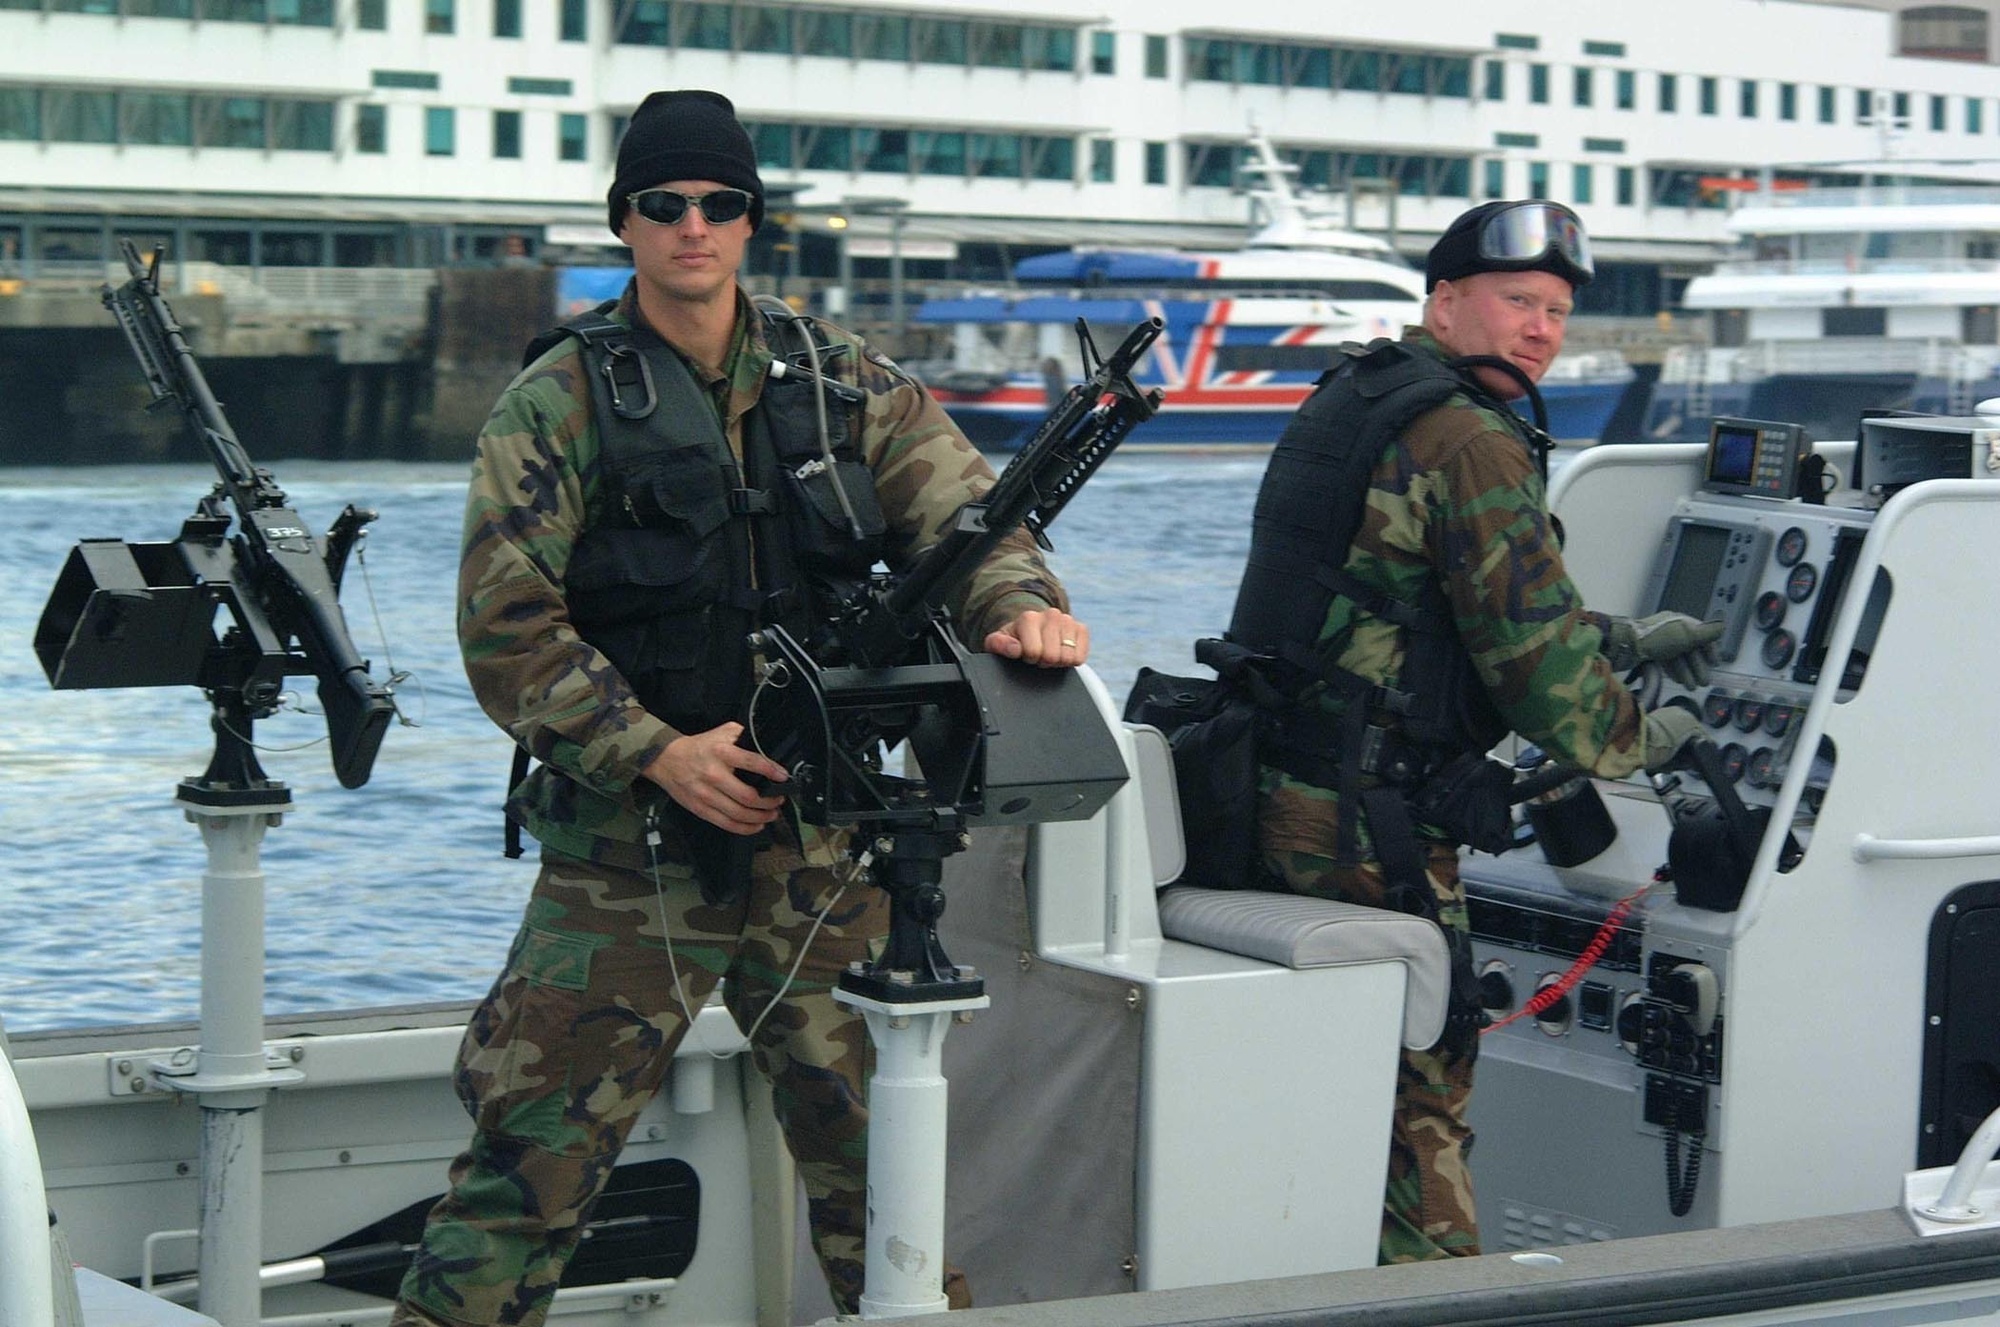 Port Security Unit 313 conducts joint training with King County Metro